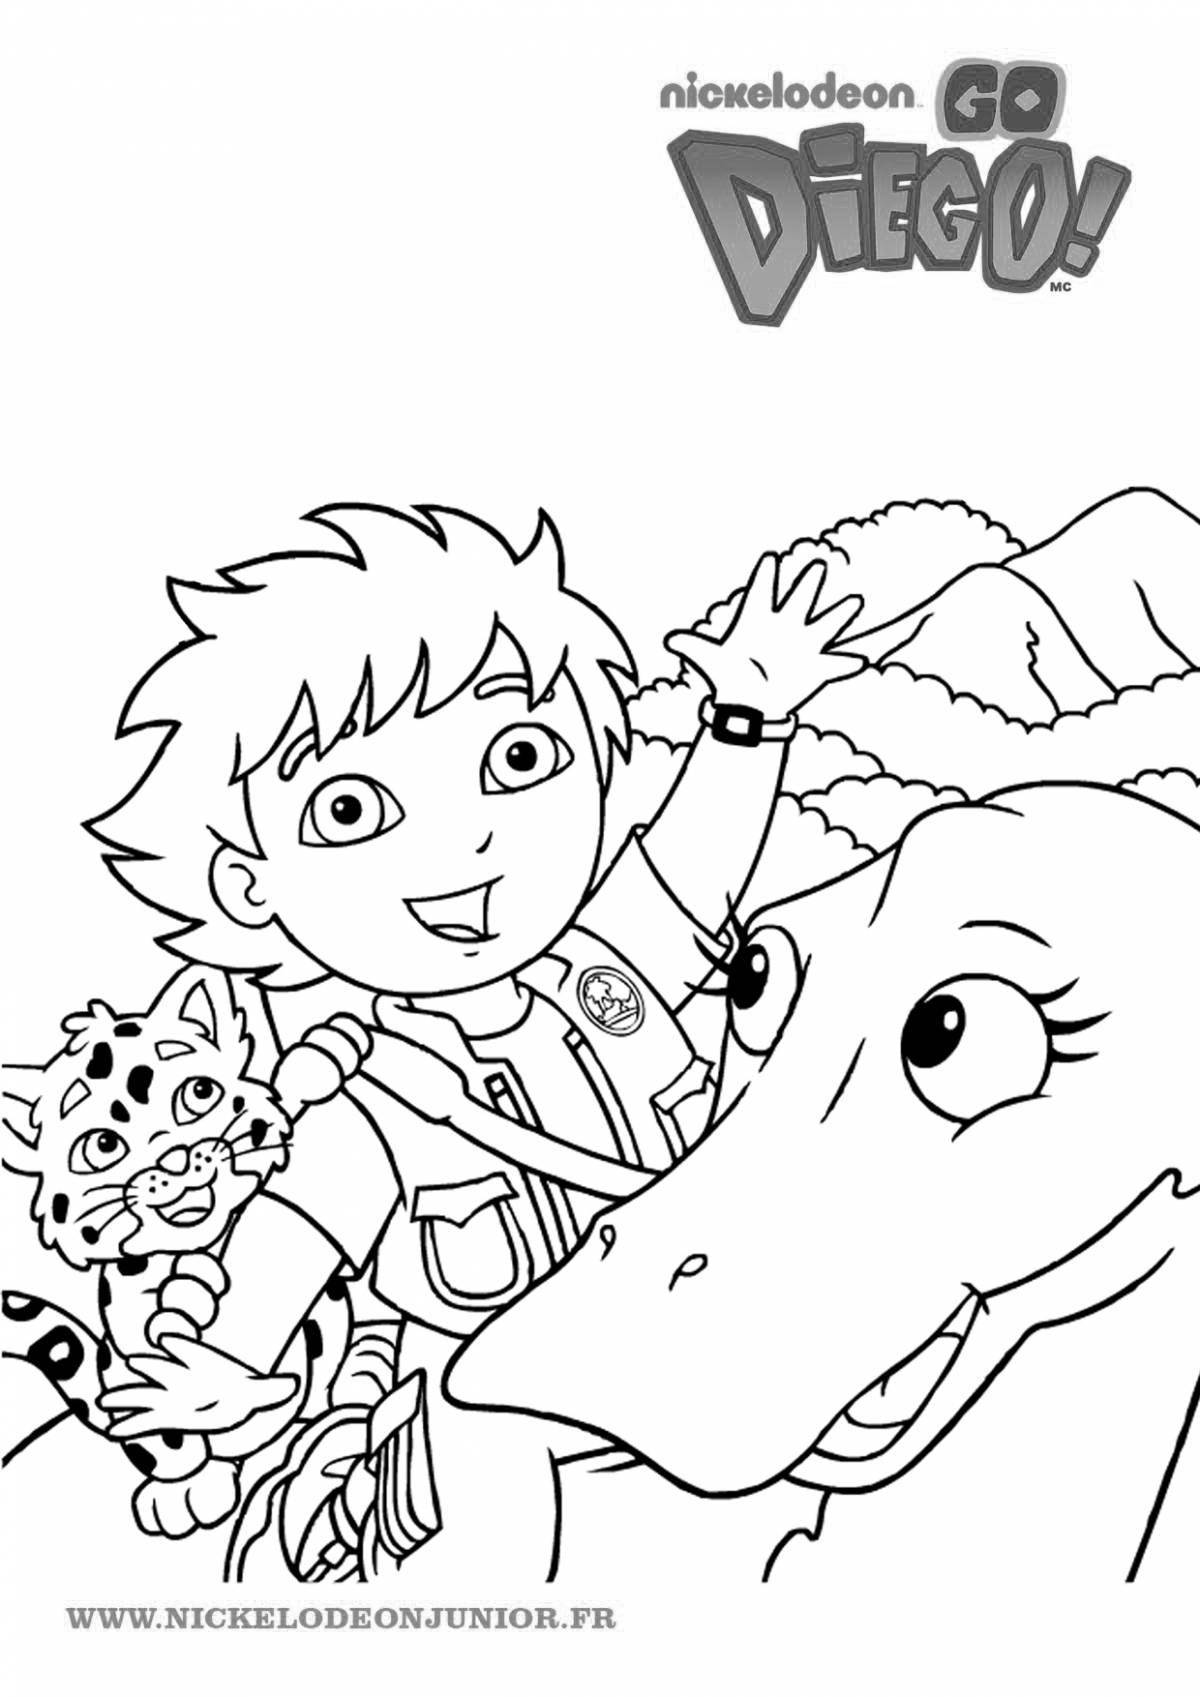 Diego's funny coloring book